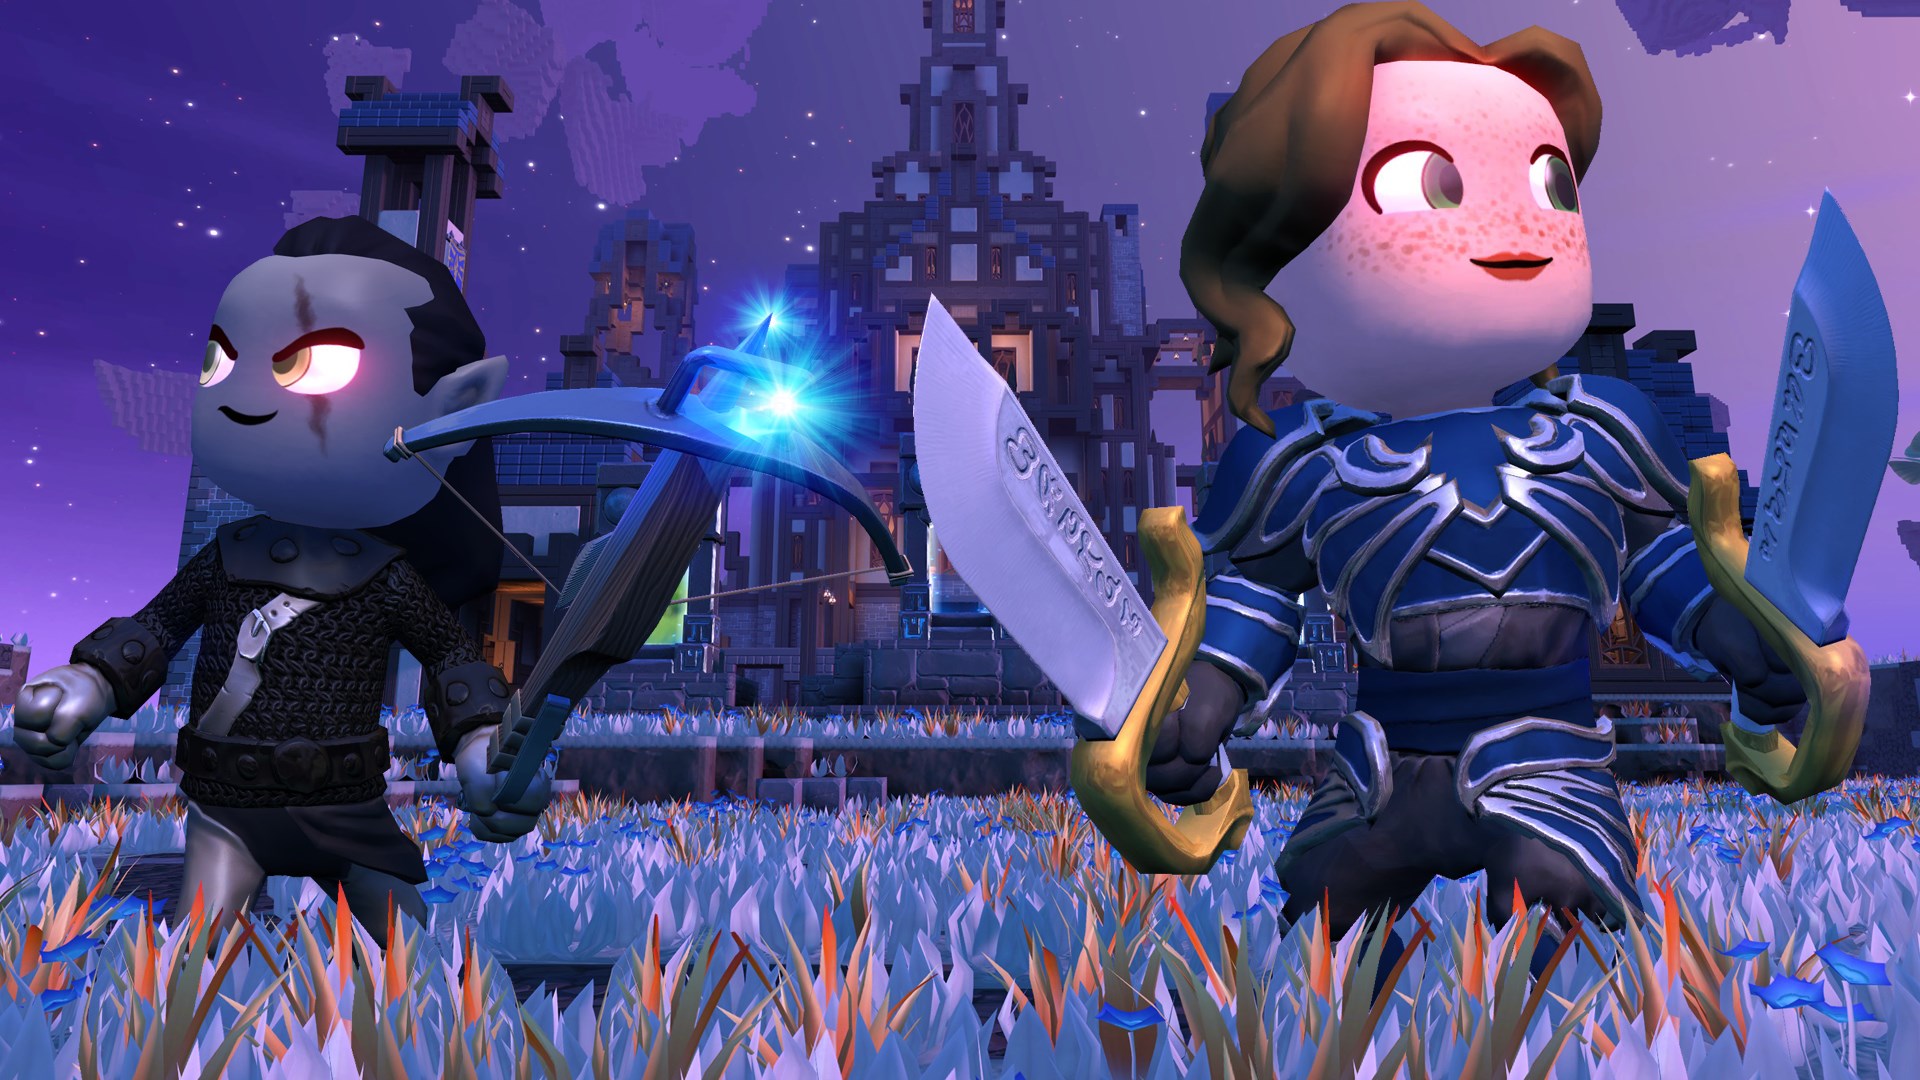 Biggest portal knights update ever brings elves rogues rifts and more